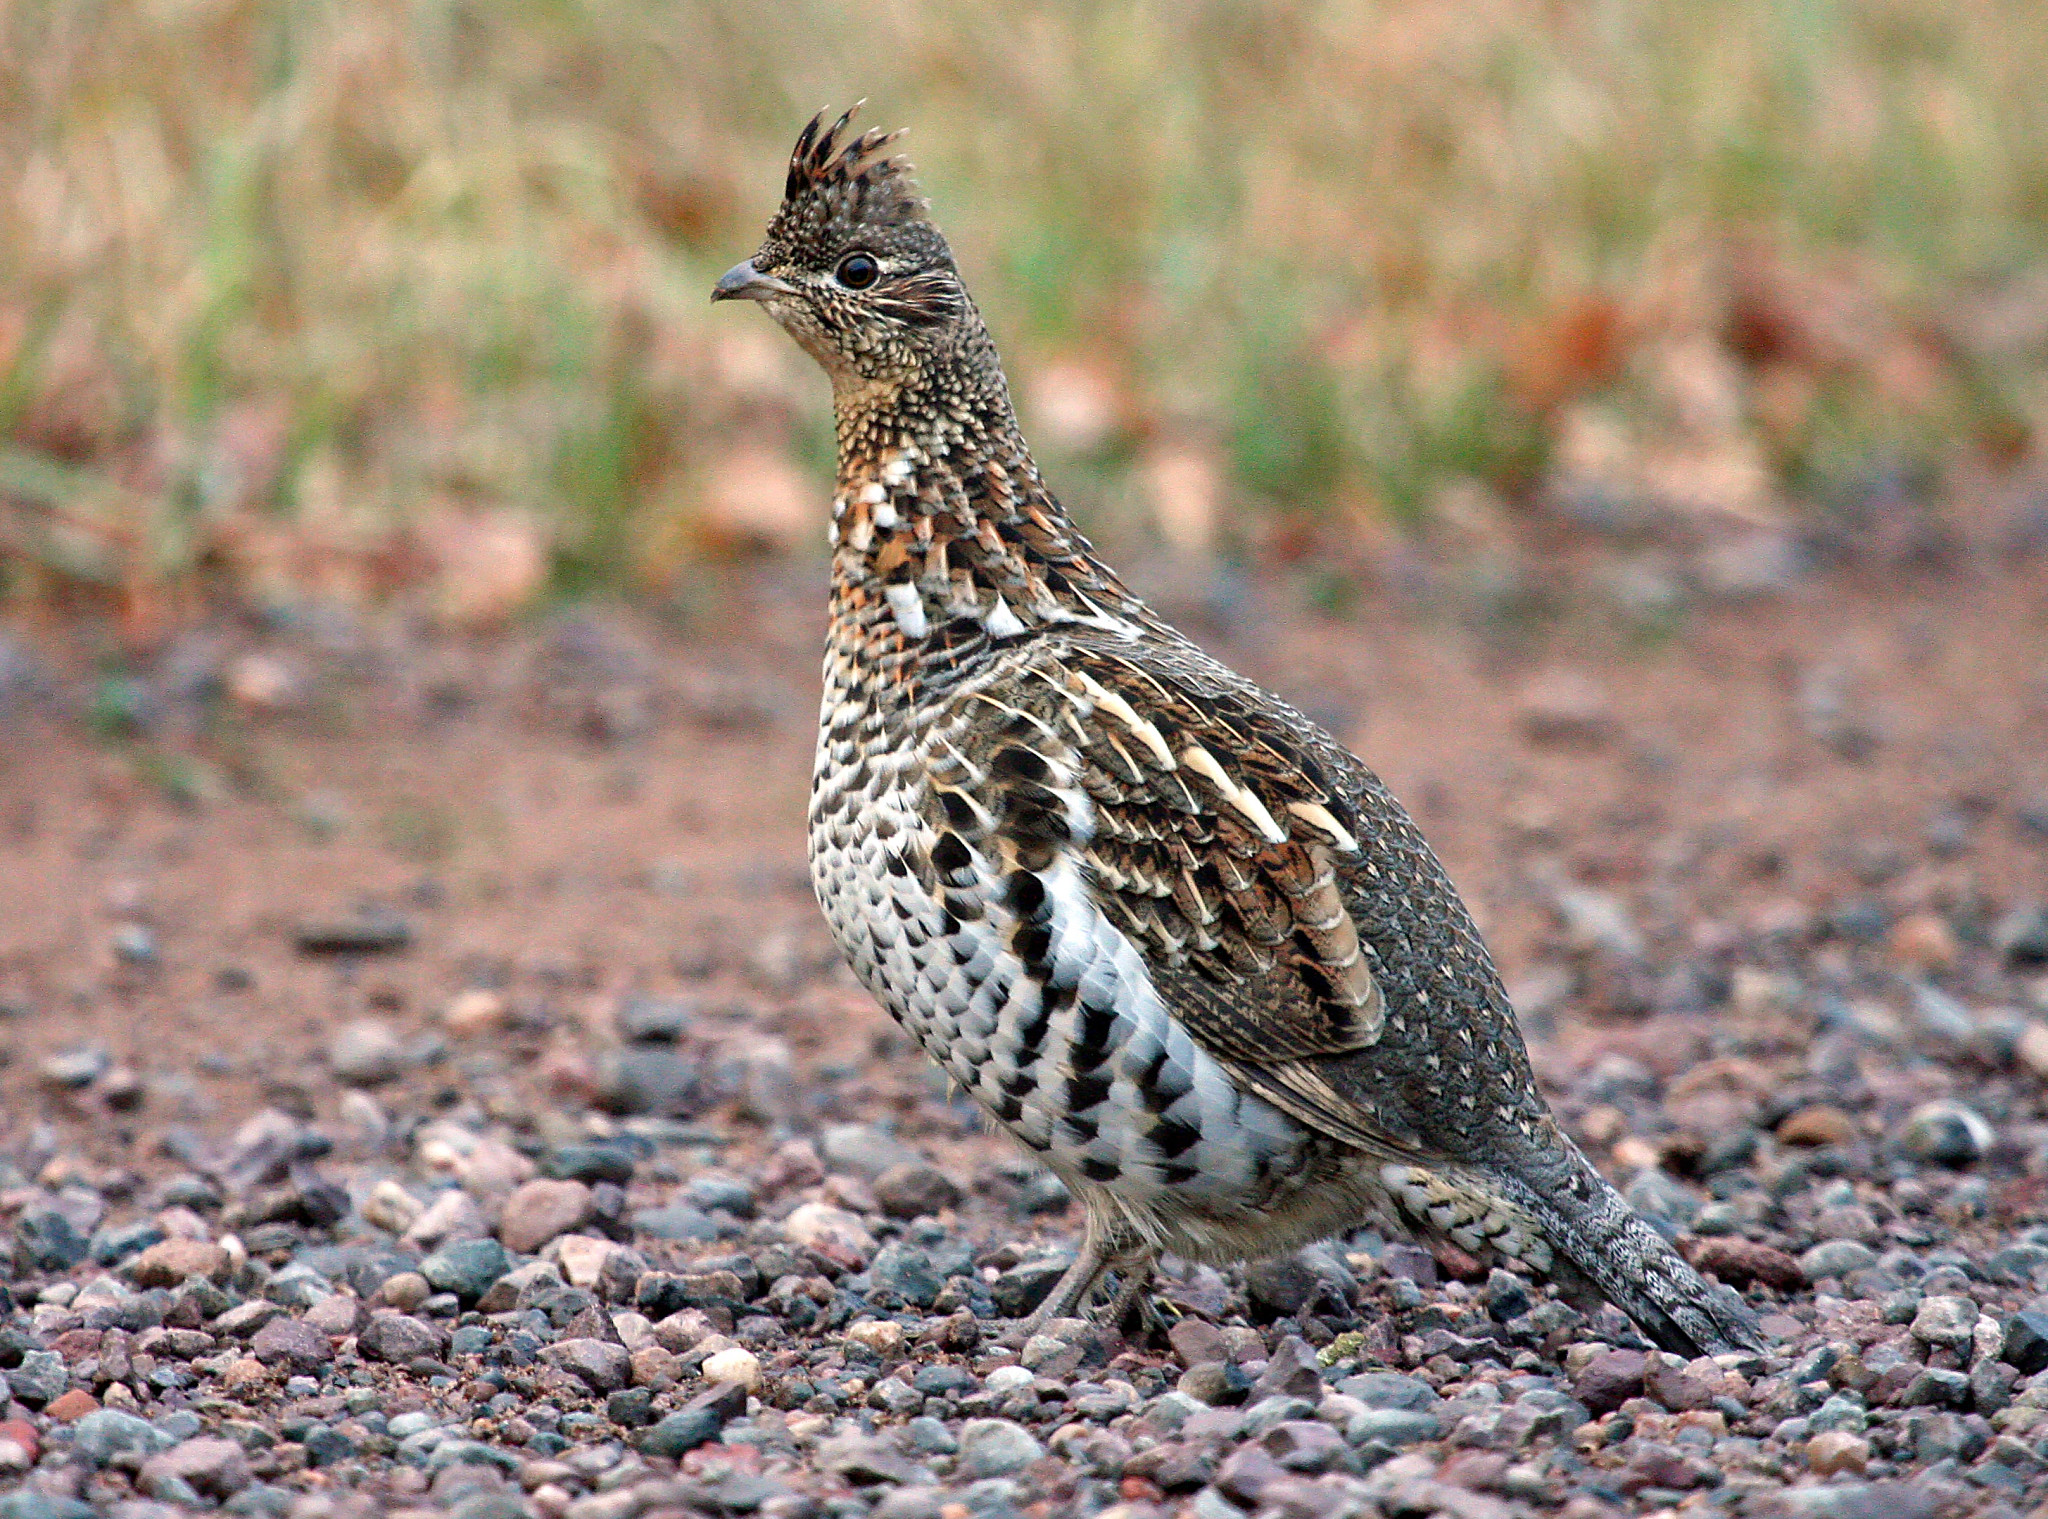 Participate In Ruffed Grouse West Nile Virus Sampling This Fall